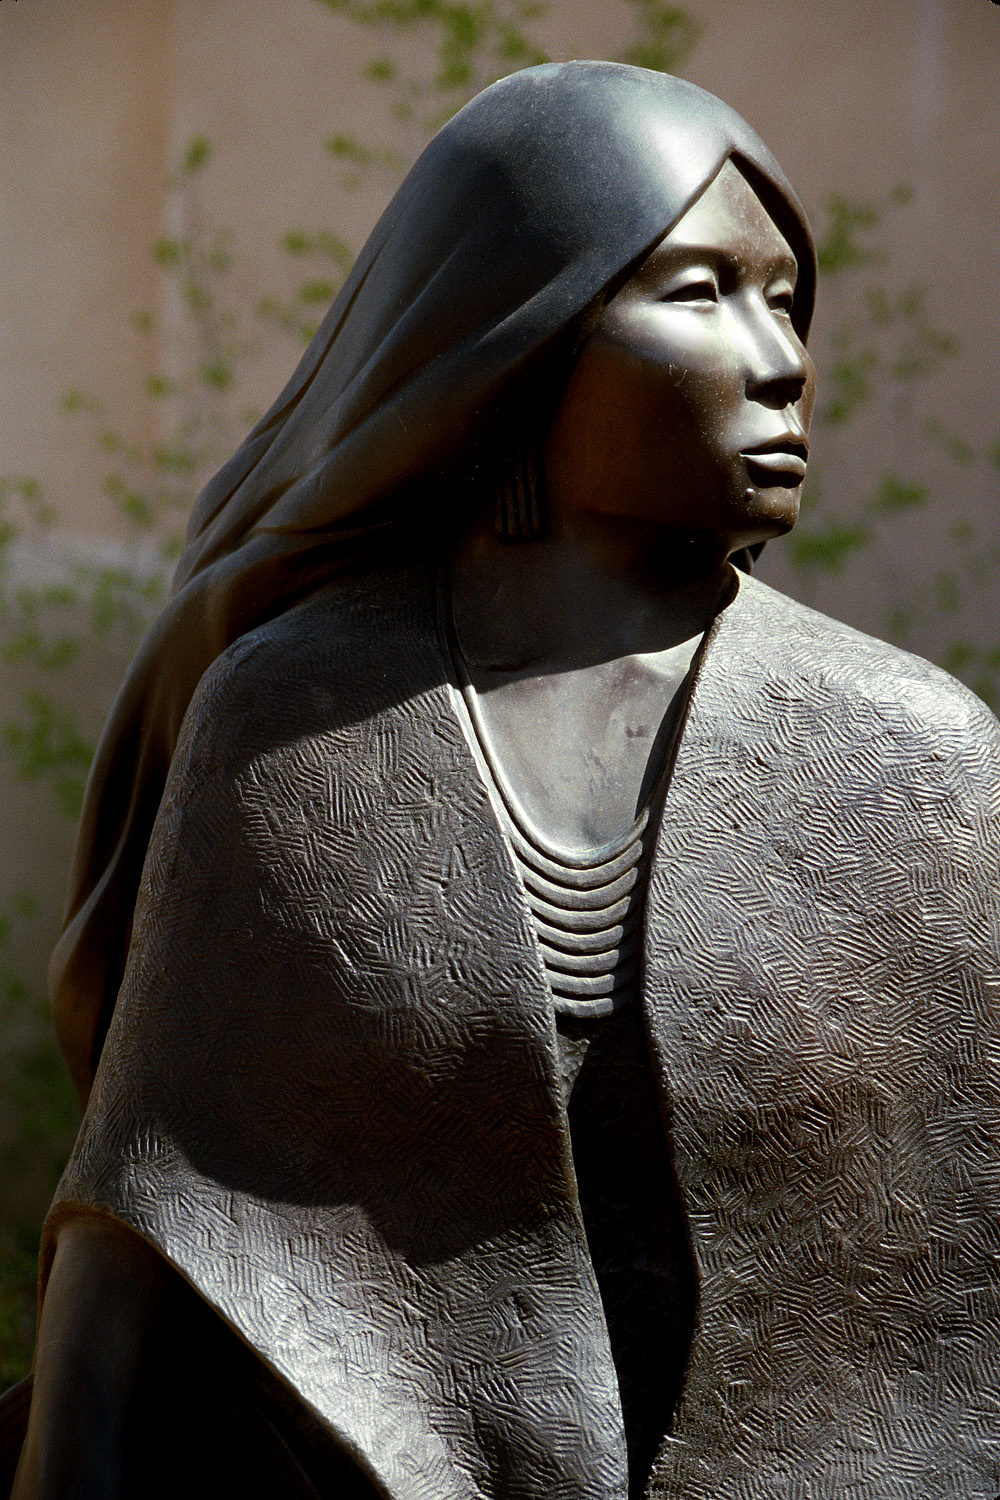 bill-hocker-at-the-museum-of-indian-arts-and-culture-santa-fe-new-mexico-2003